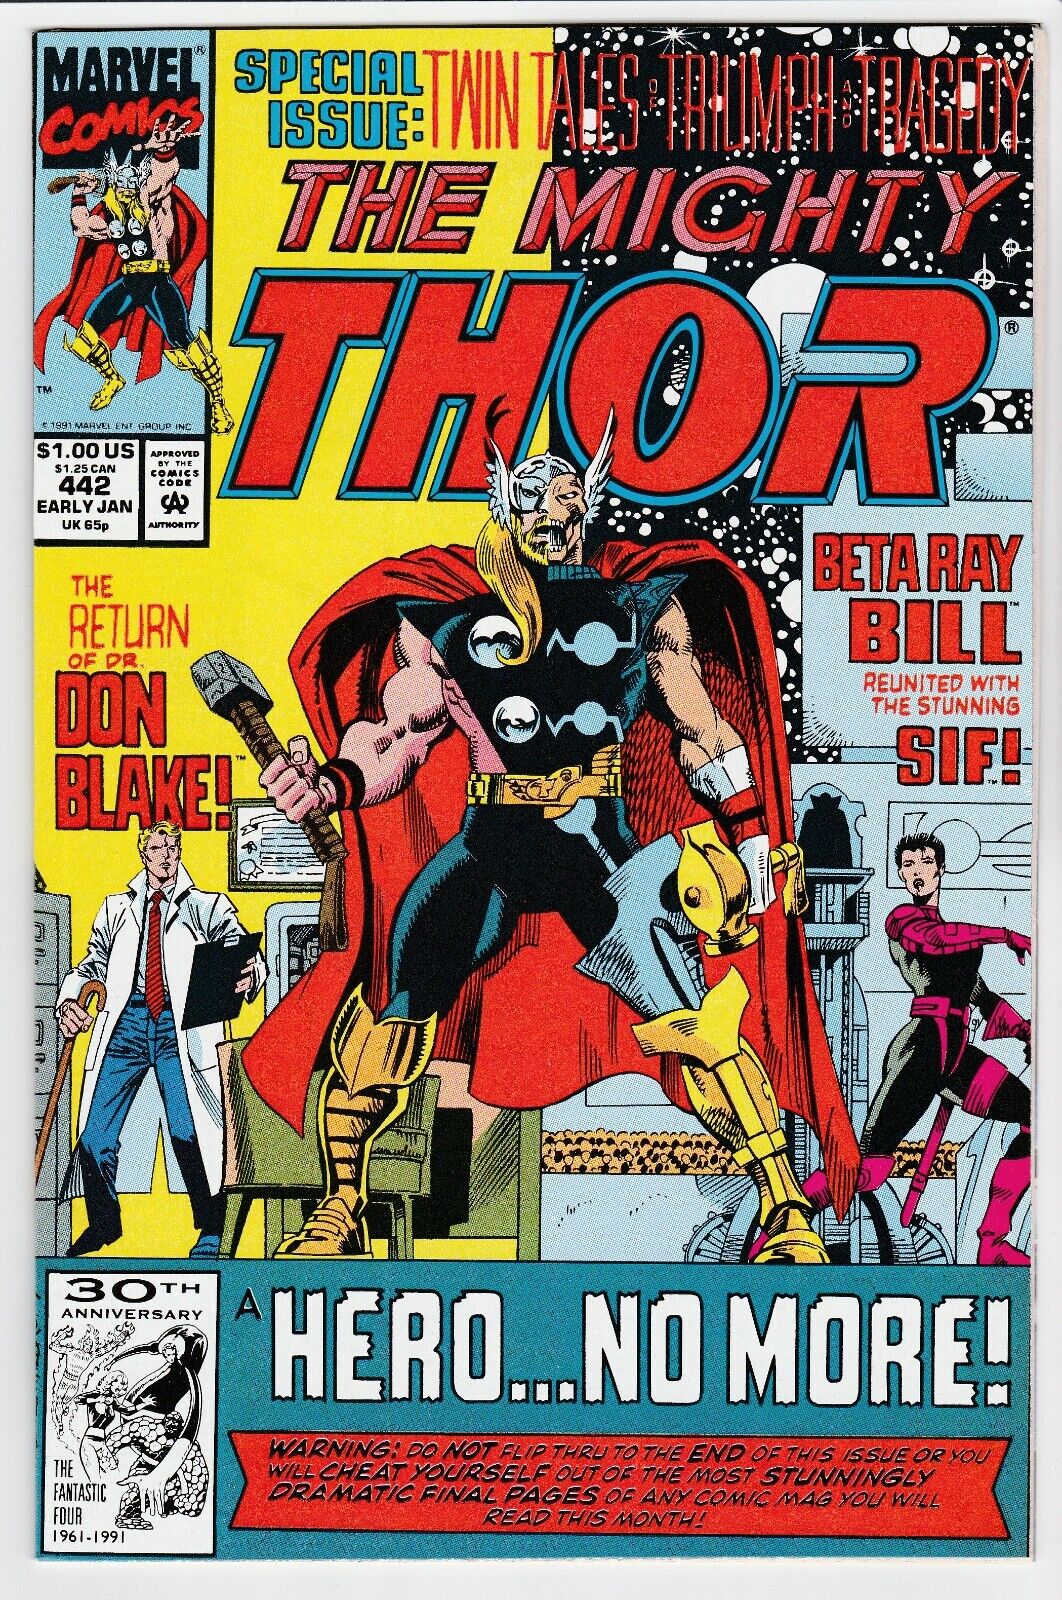 THOR COMICS VOL 1 ISSUES #442 - #502 & ANN  YOU PICK - COMPLETE YOUR RUN  MARVEL